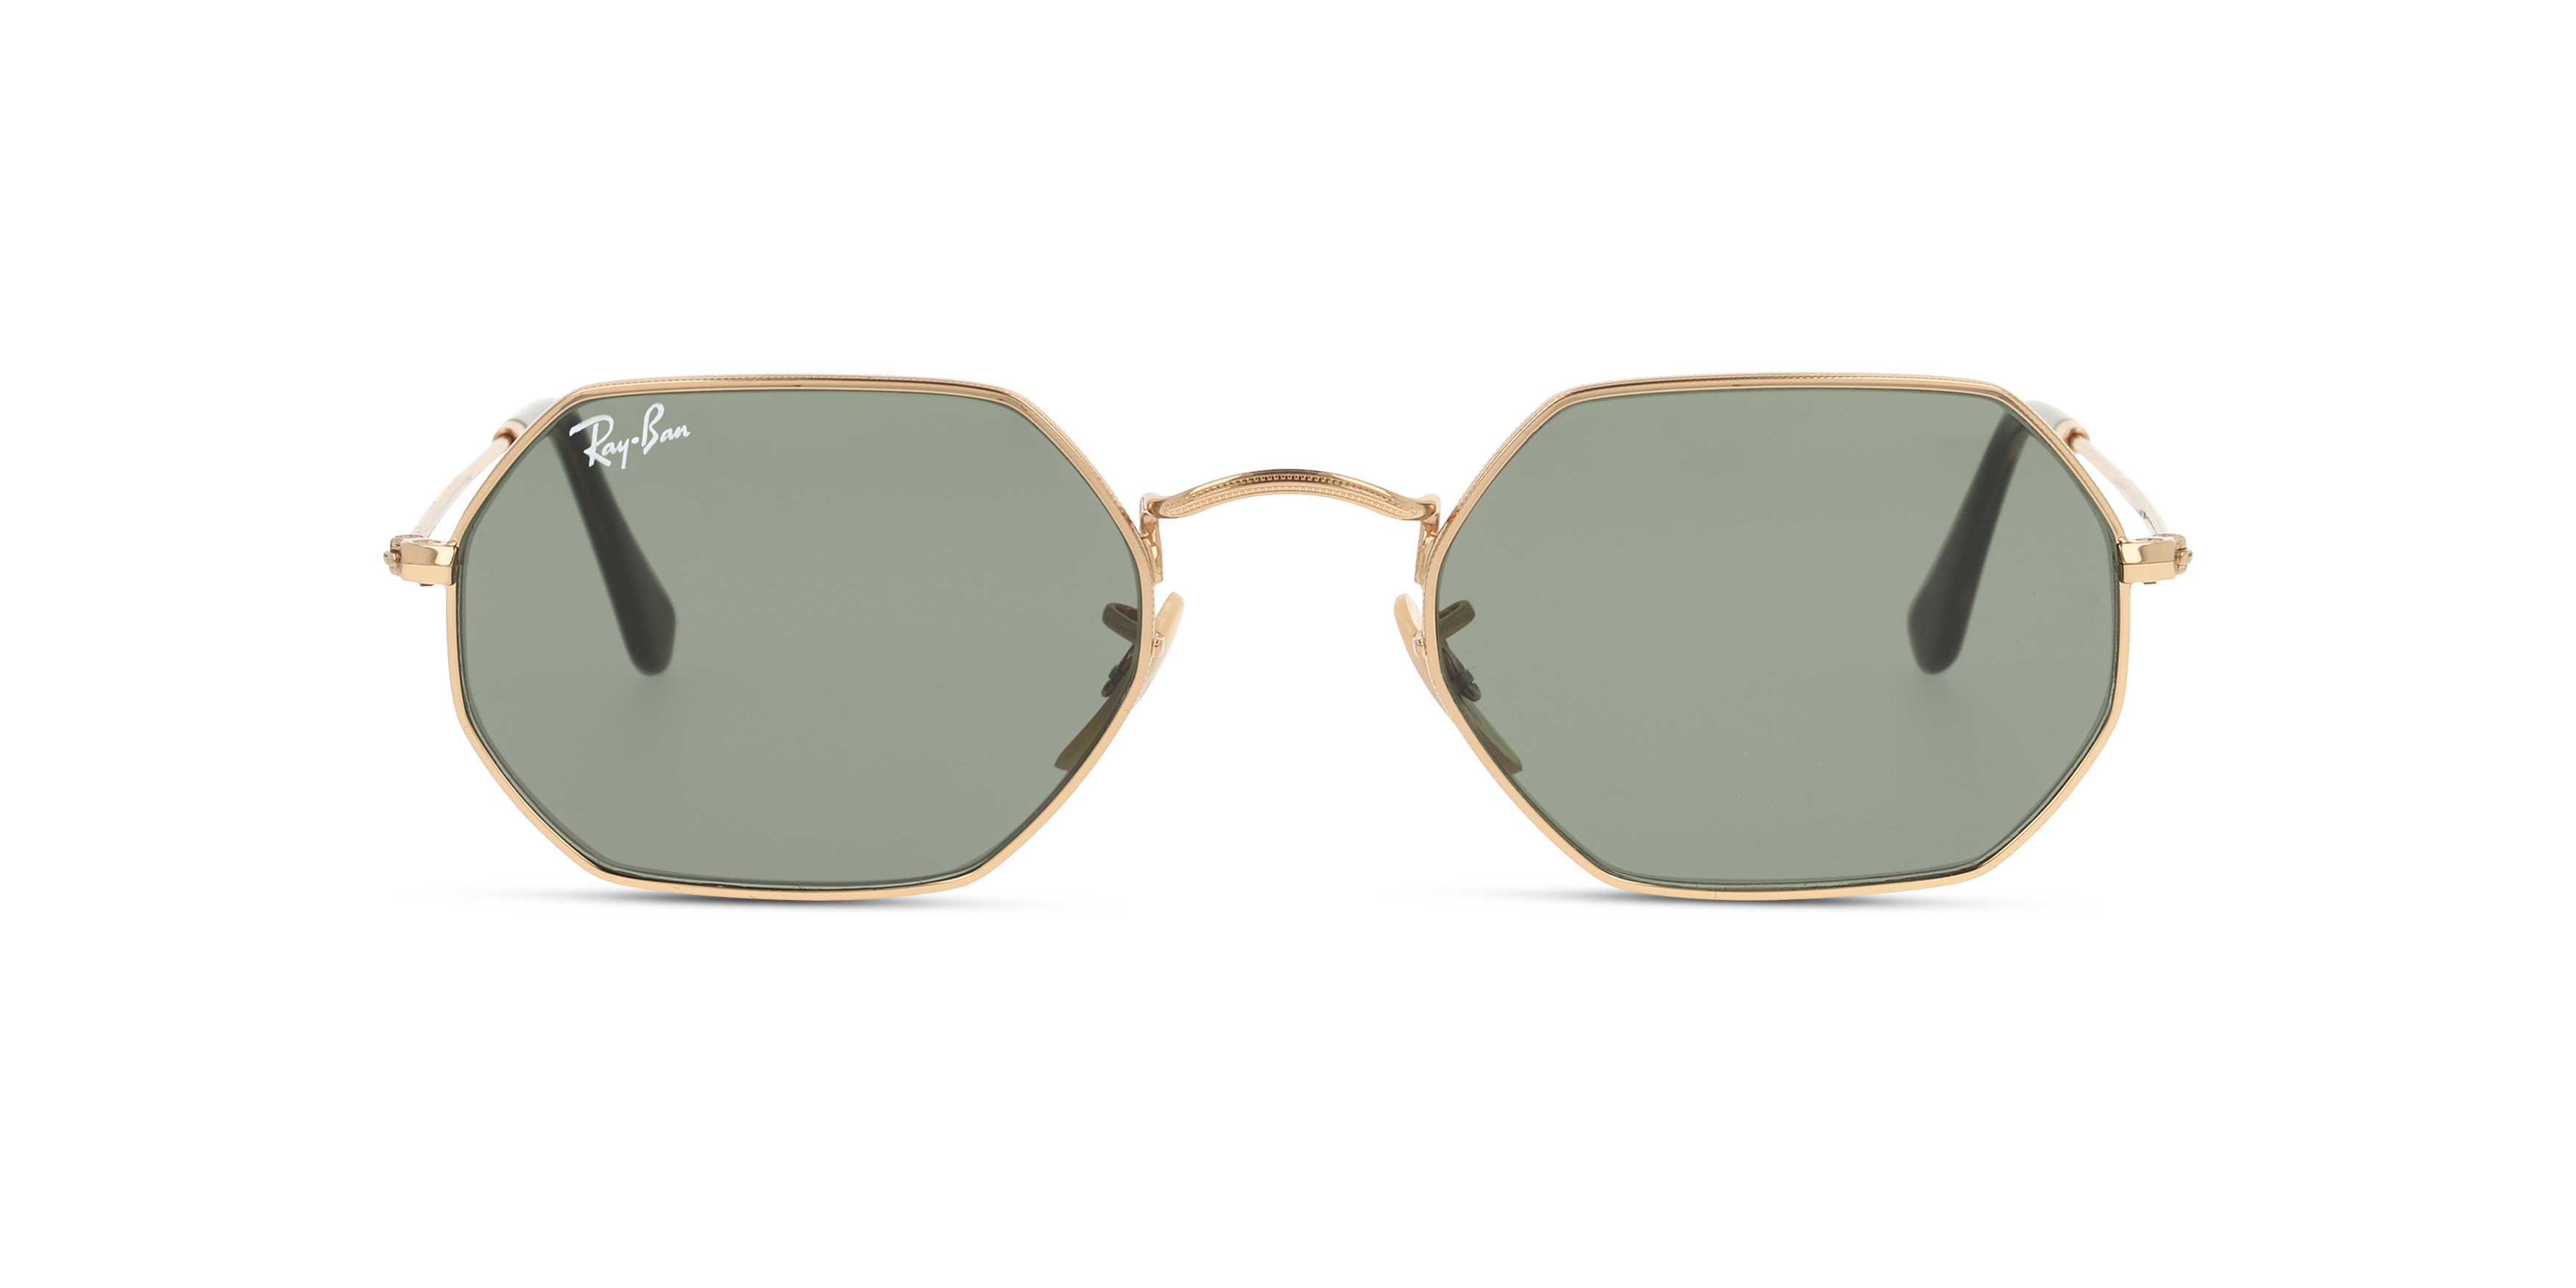 [products.image.front] RAY-BAN RB3556N 1